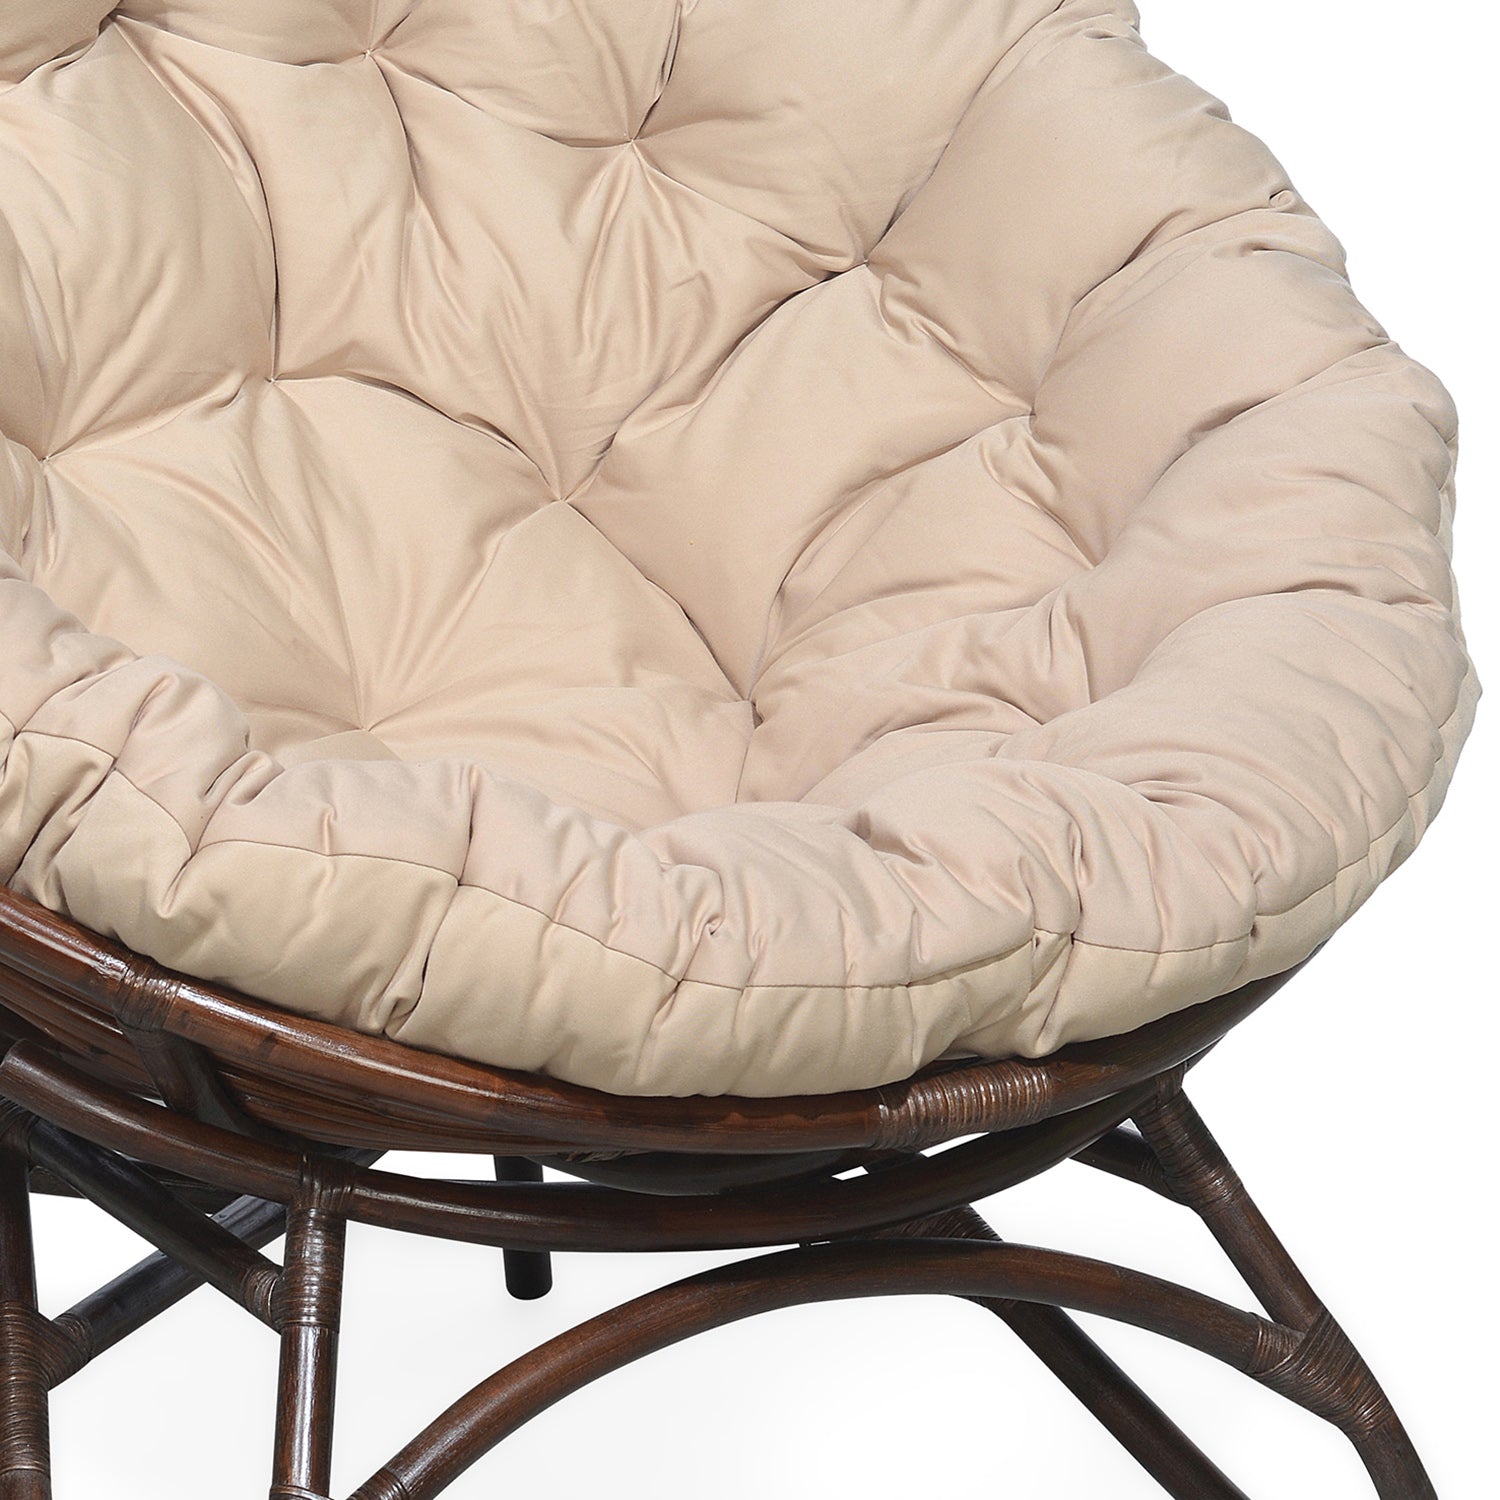 Plush Occassional Chair (Brown)